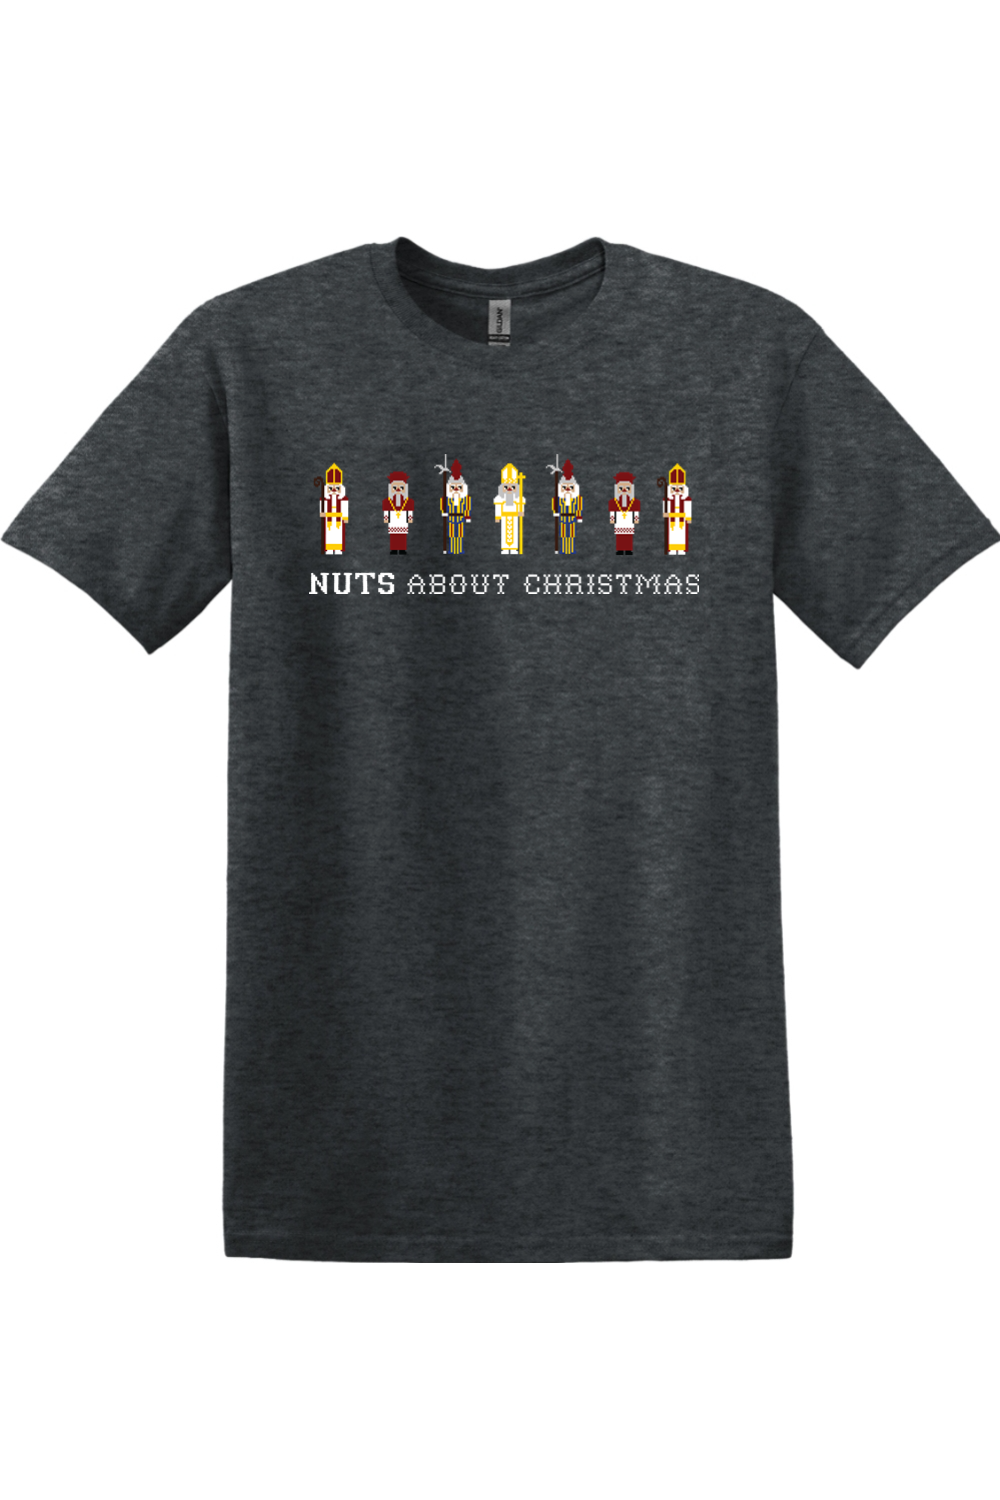 Nuts About Christmas Adult T-shirt